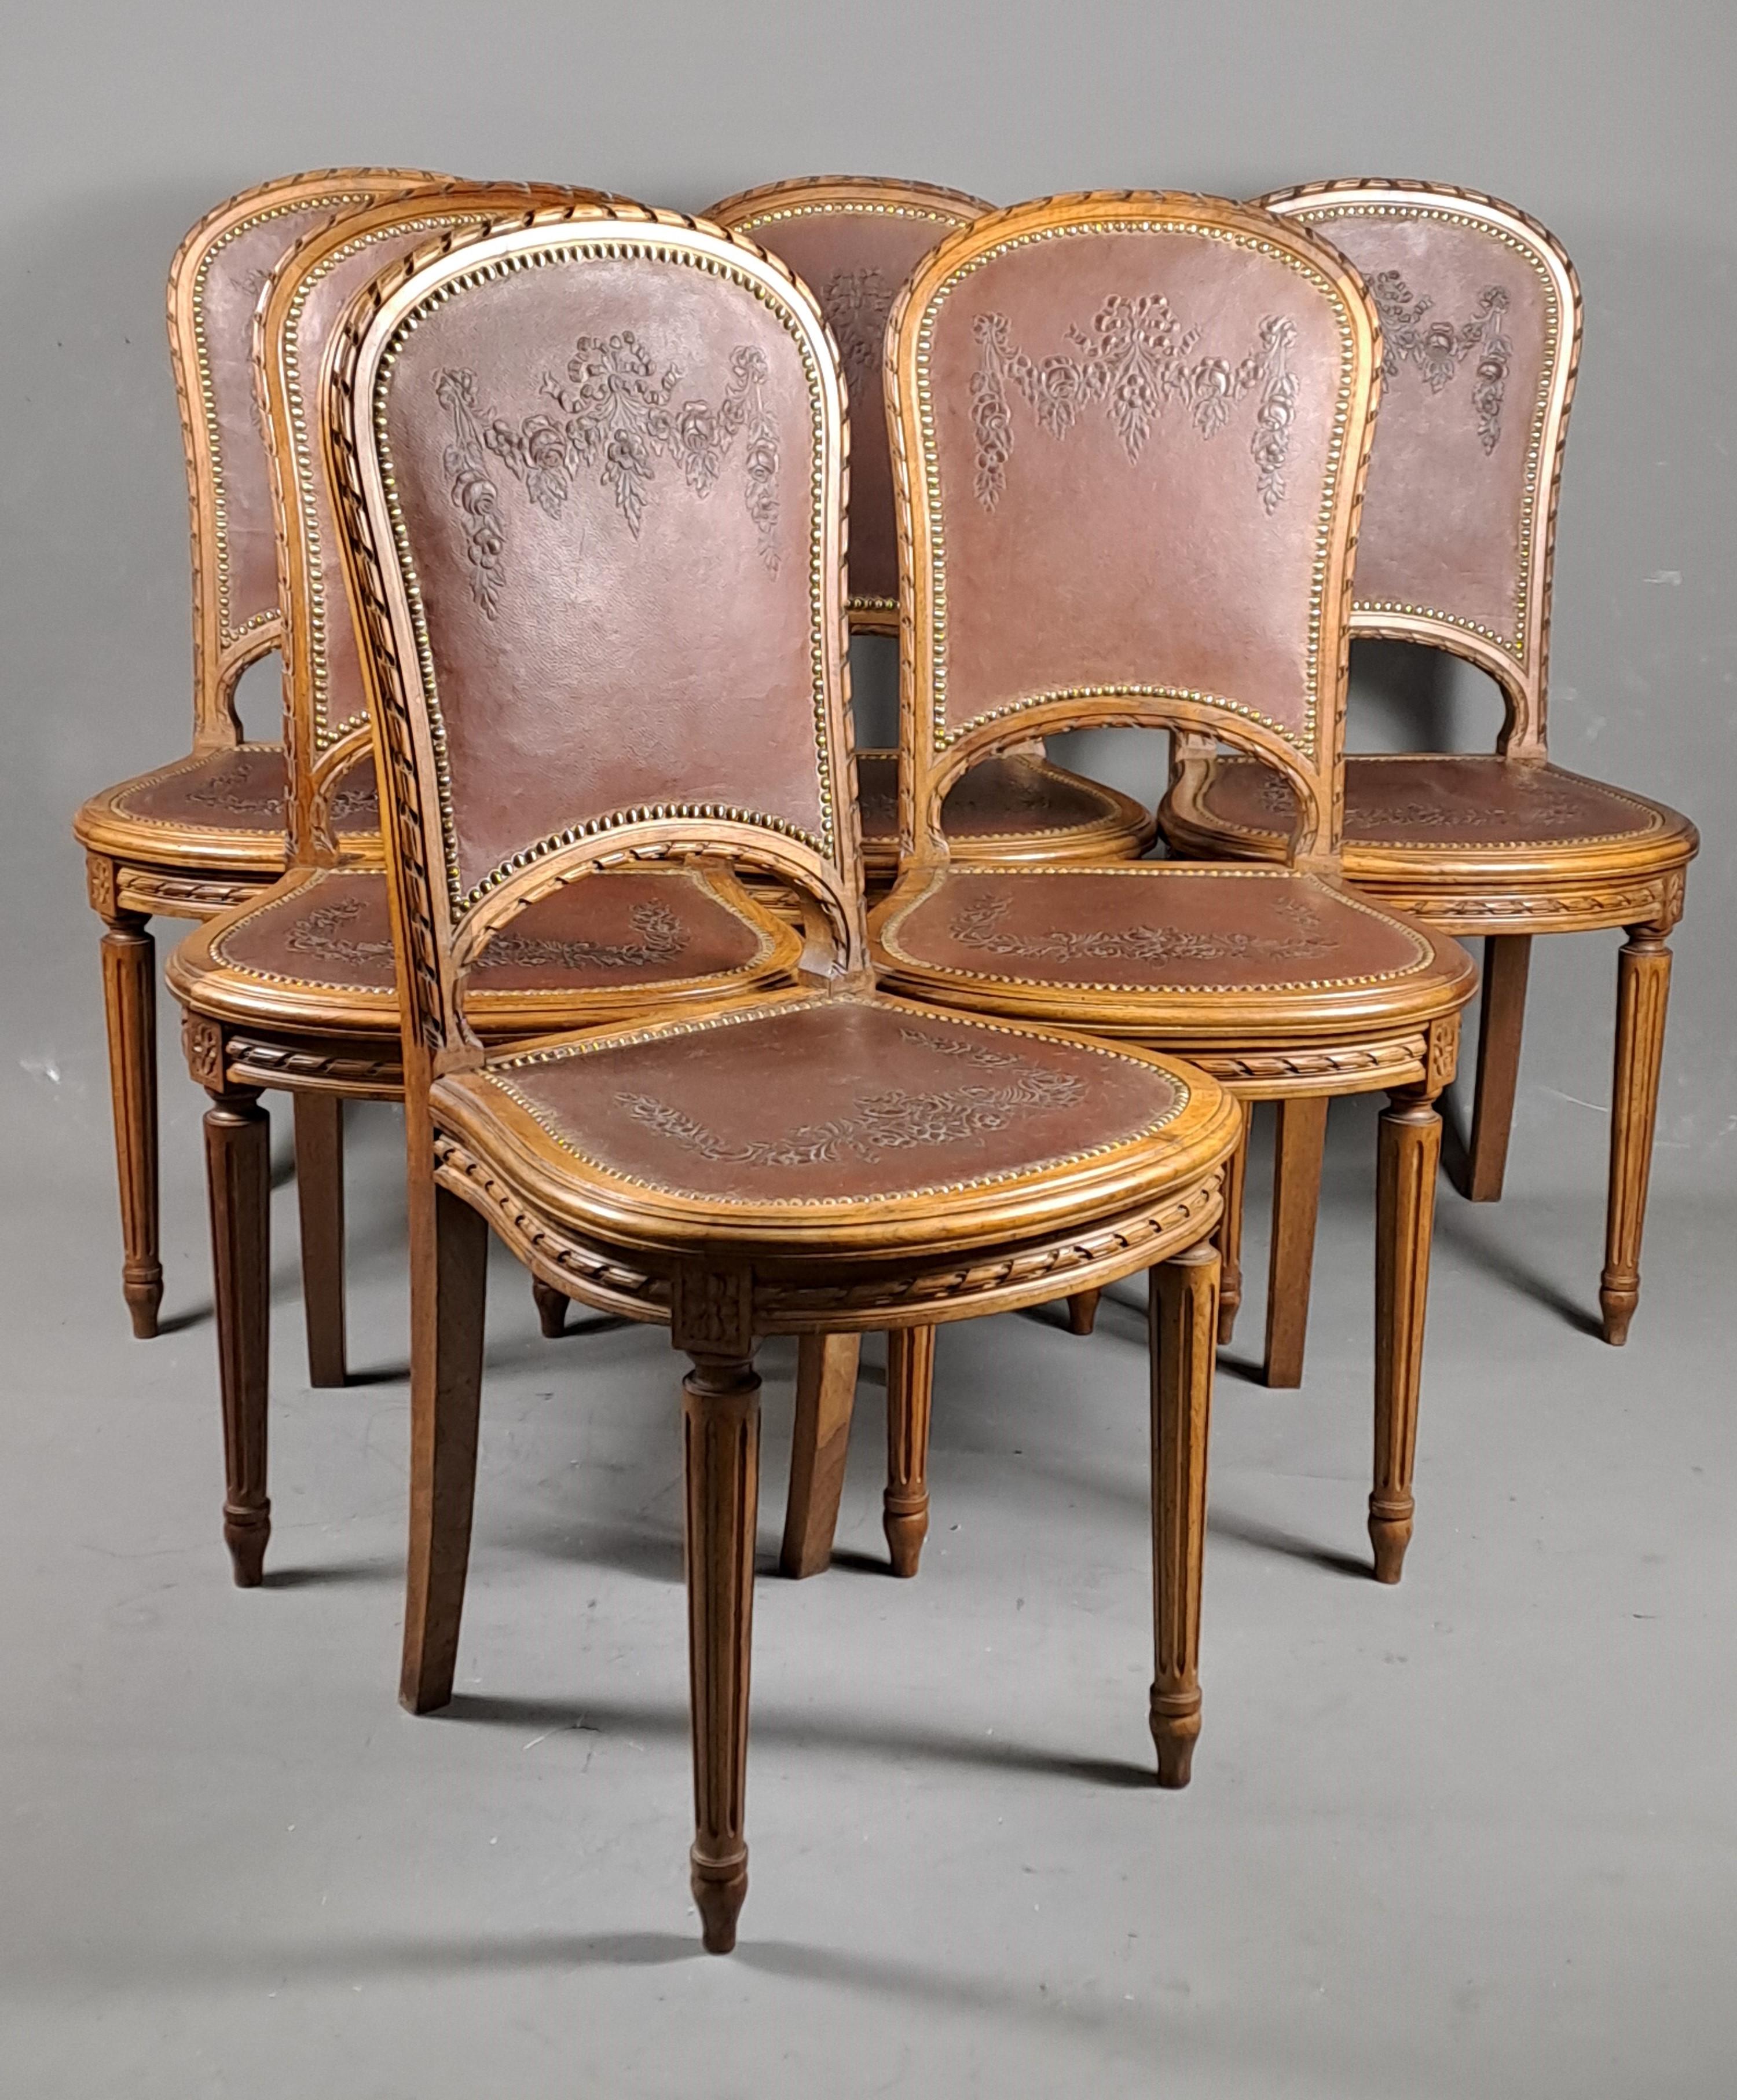 French Series Of 6 Louis XVI Style Chairs In Solid Walnut And Embossed Cordoba Leather  For Sale